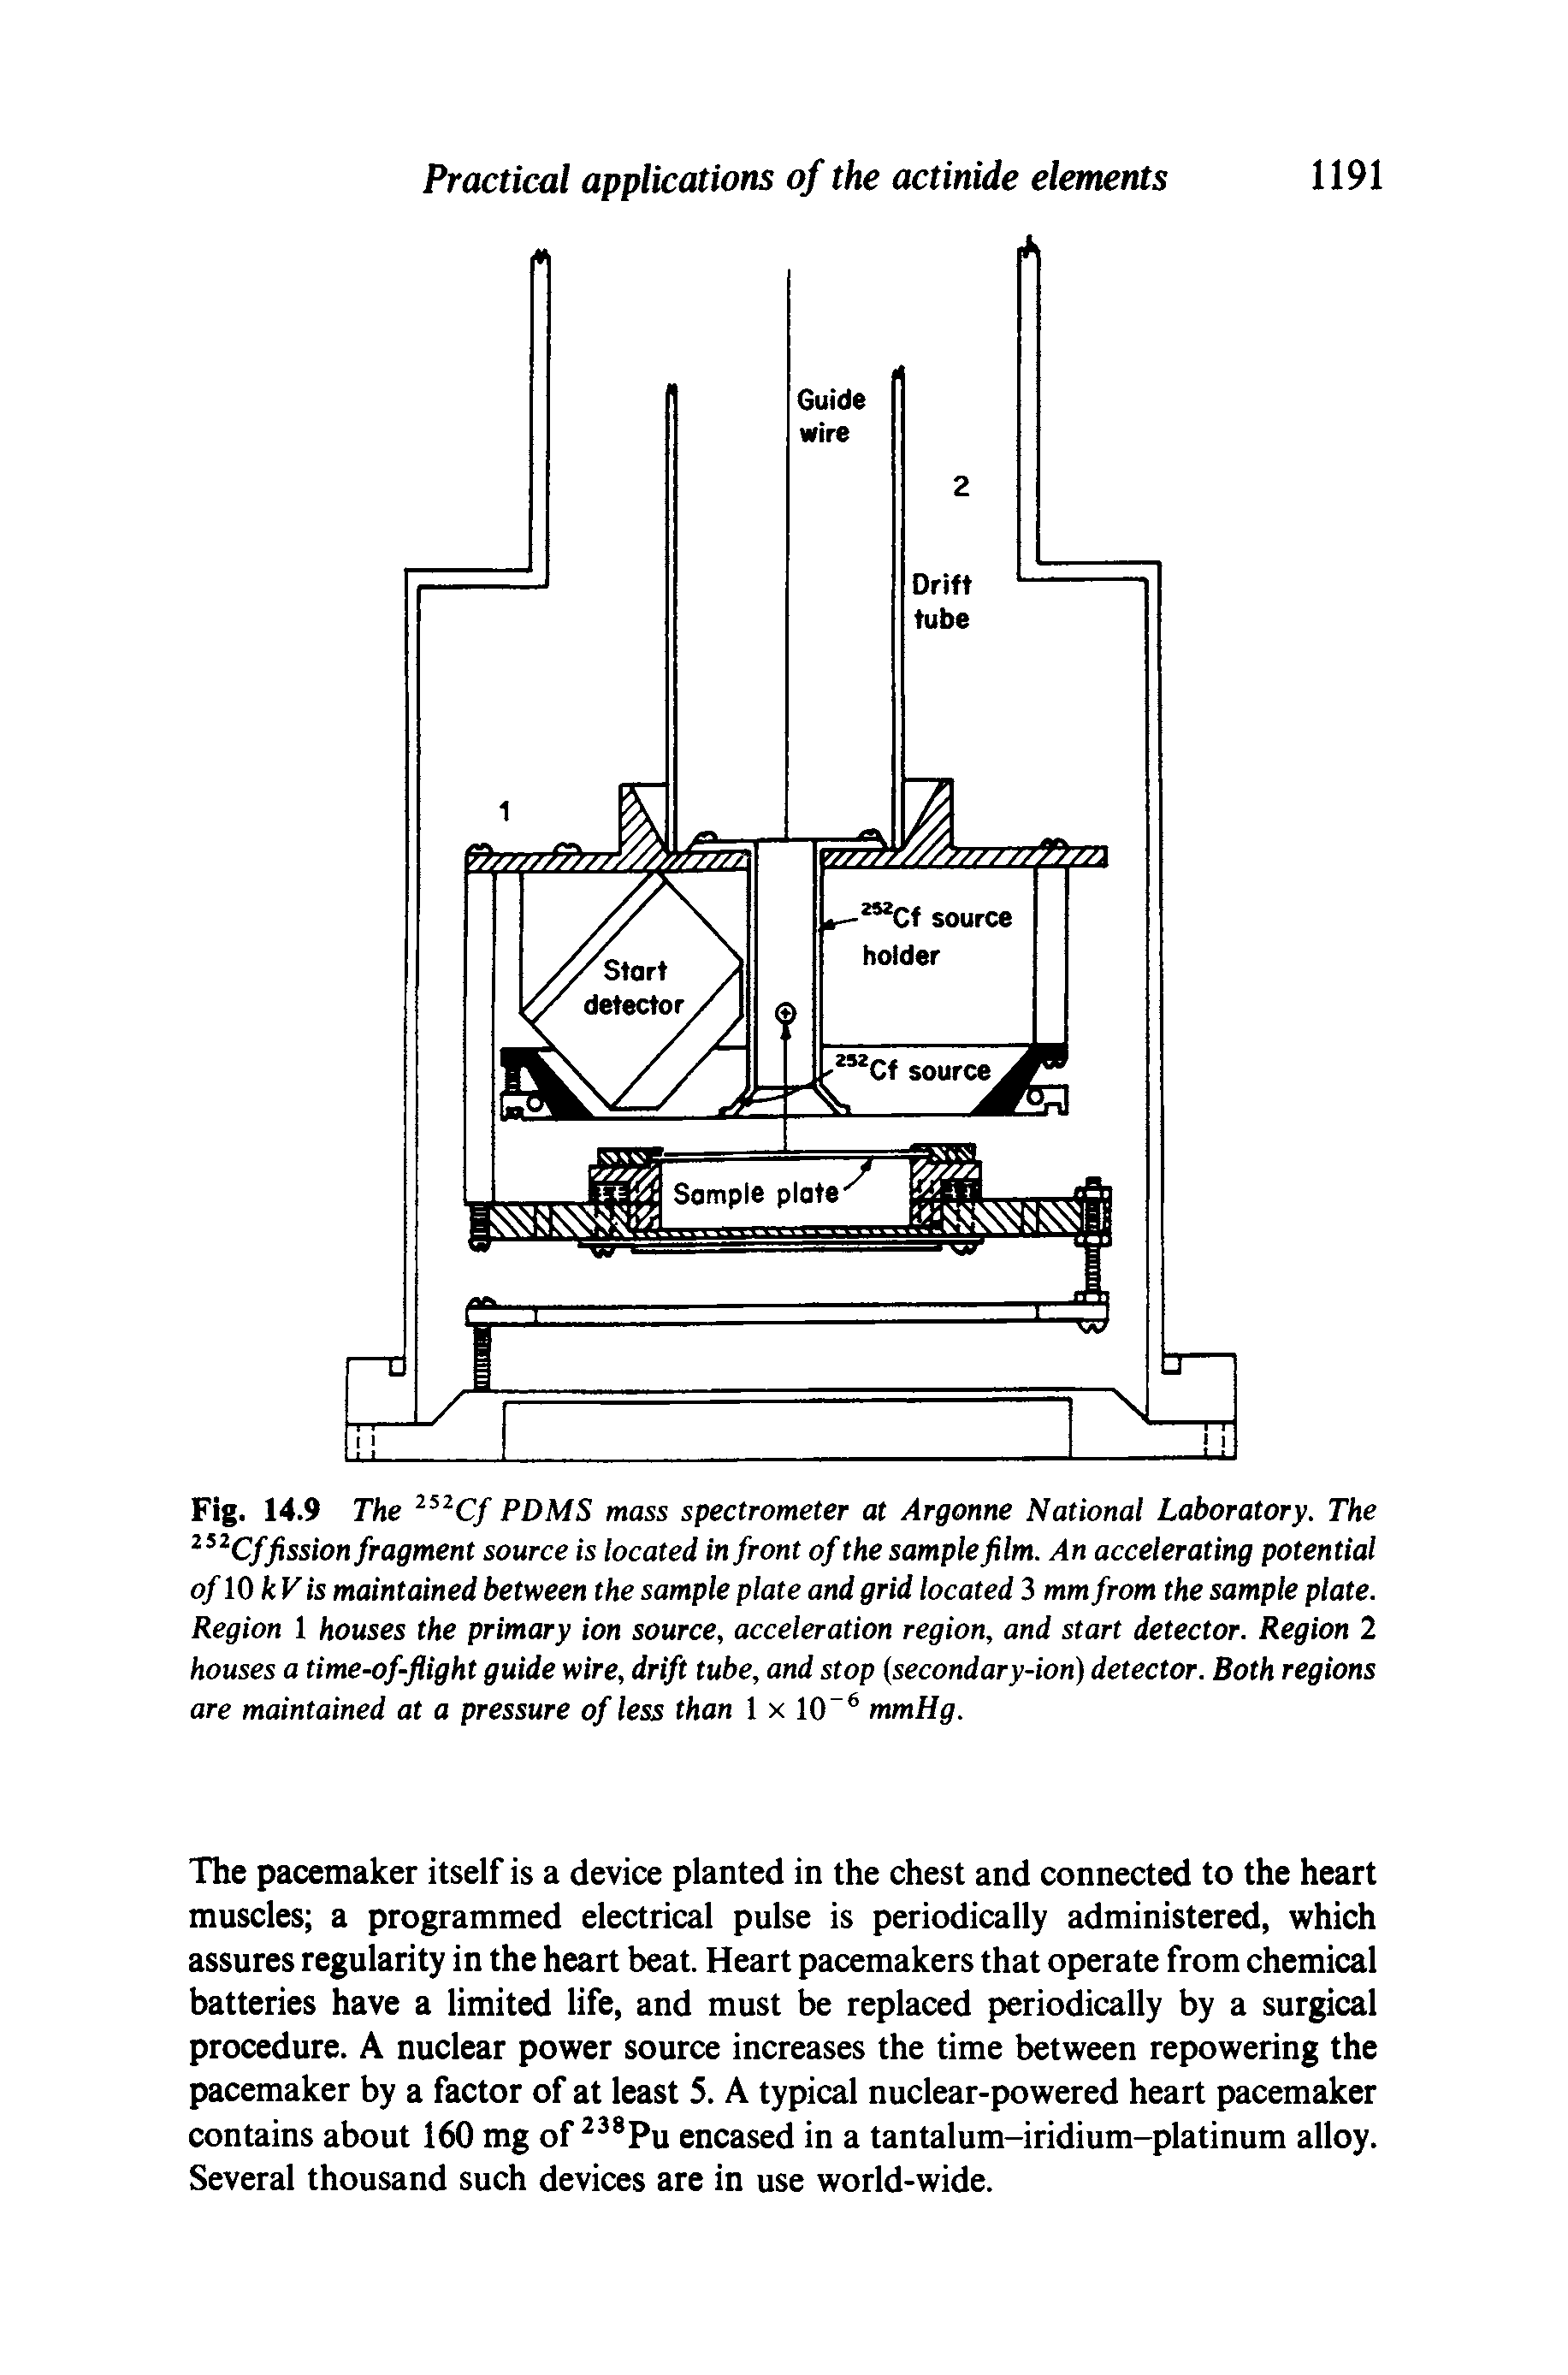 Fig. 14.9 The PDMS mass spectrometer at Argonne National Laboratory. The fission fragment source is located in front of the sample film. An accelerating potential of 10 kV is maintained between the sample plate and grid located 3 mm from the sample plate. Region 1 houses the primary ion source, acceleration region, and start detector. Region 2 houses a time-of-flight guide wire, drift tube, and stop secondary-ion) detector. Both regions are maintained at a pressure of less than 1 x 10 mmHg.